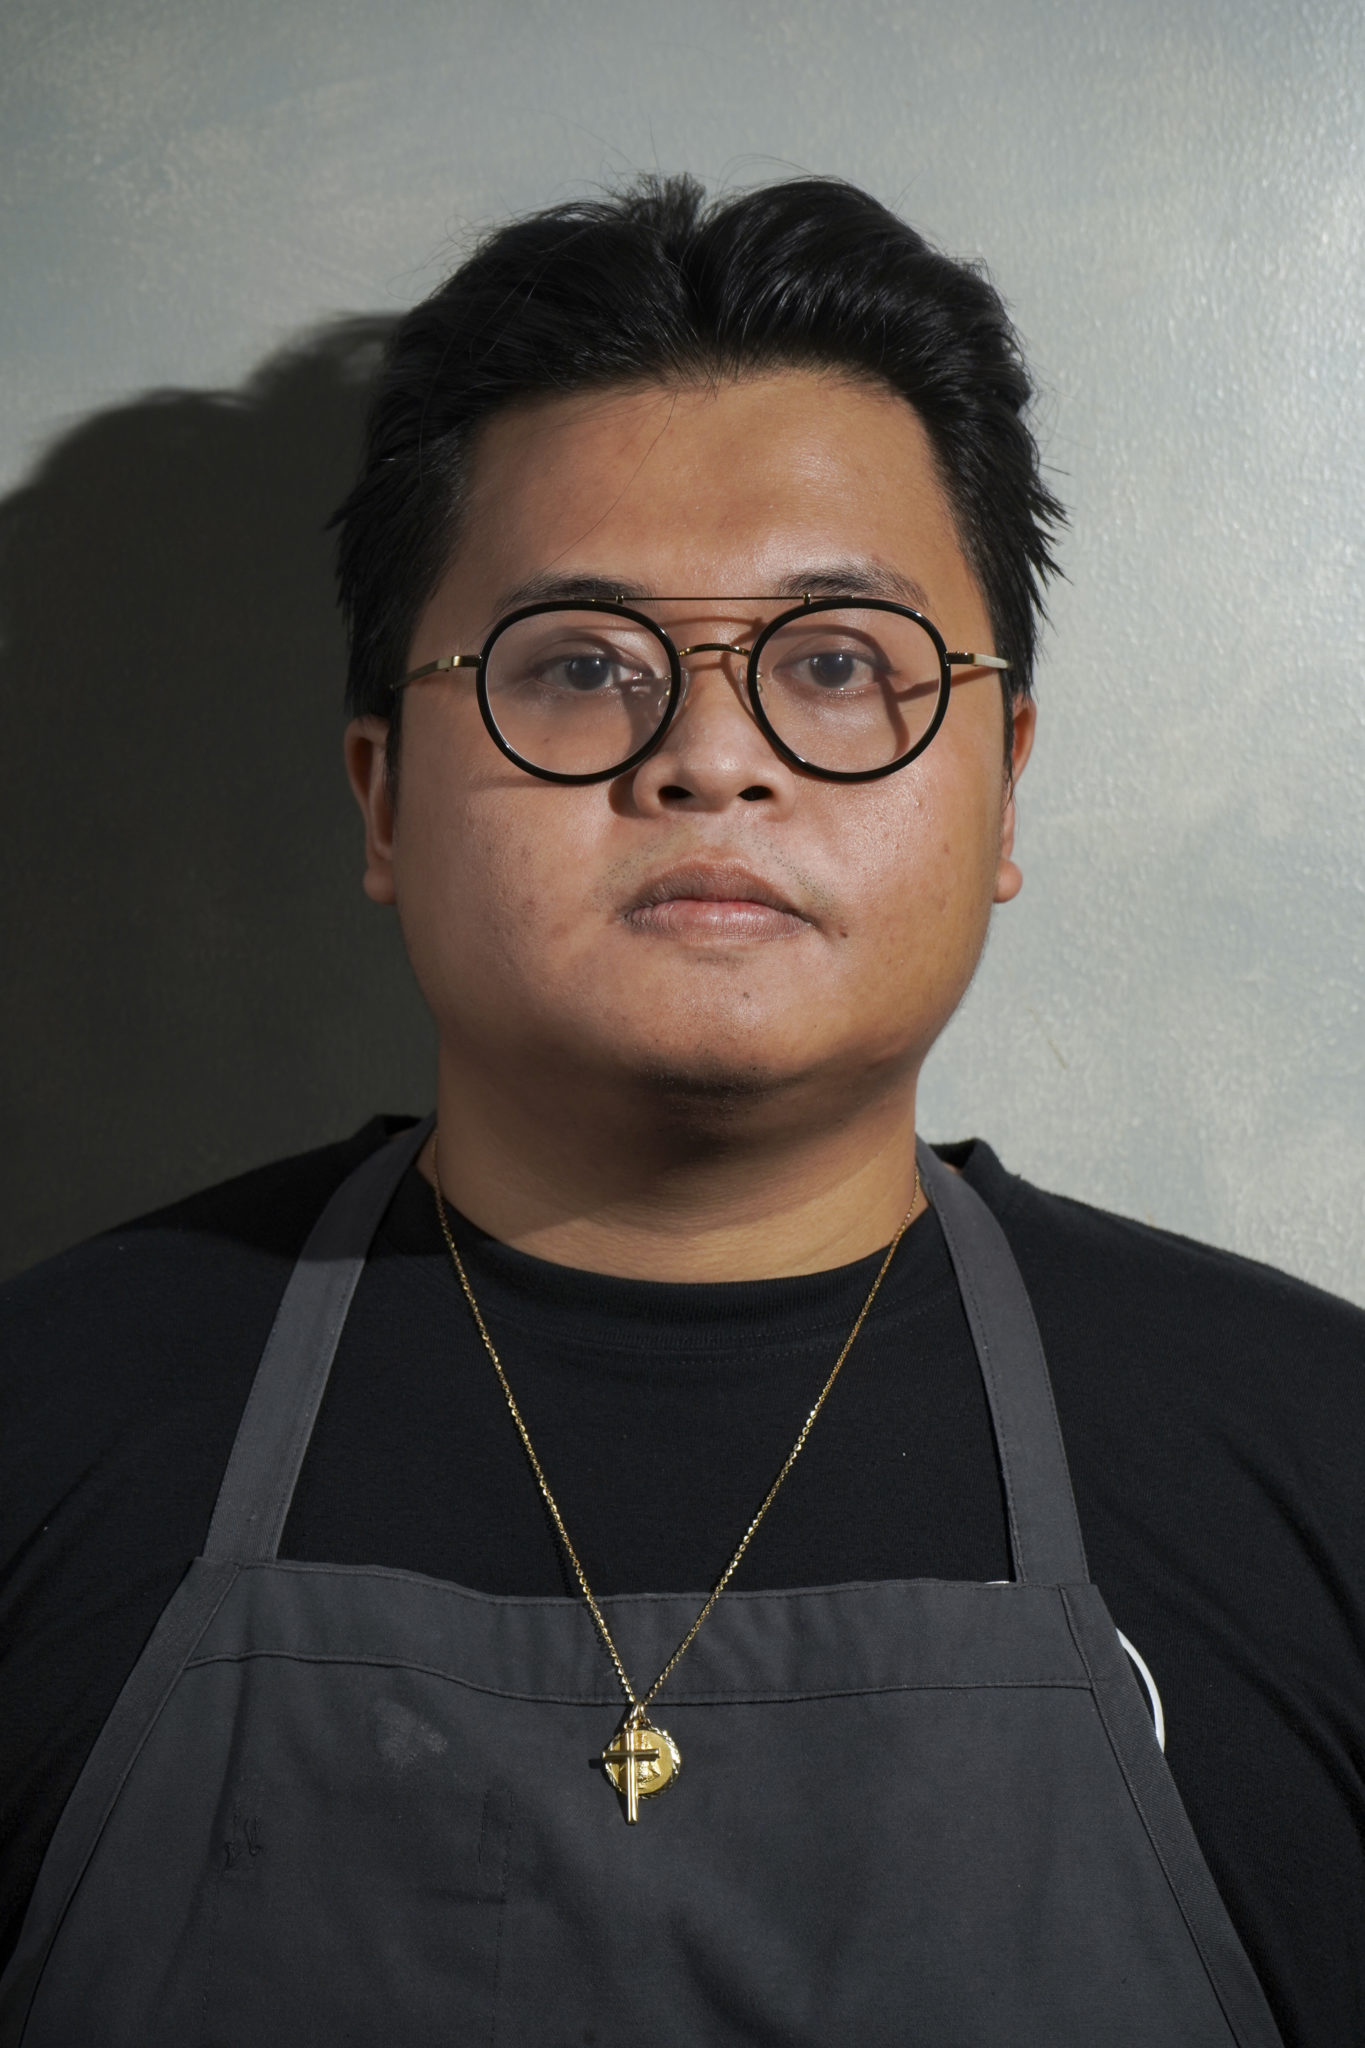 Besides being a co-owner and chef of Hapag, Kevin Villarica is also a jeweler